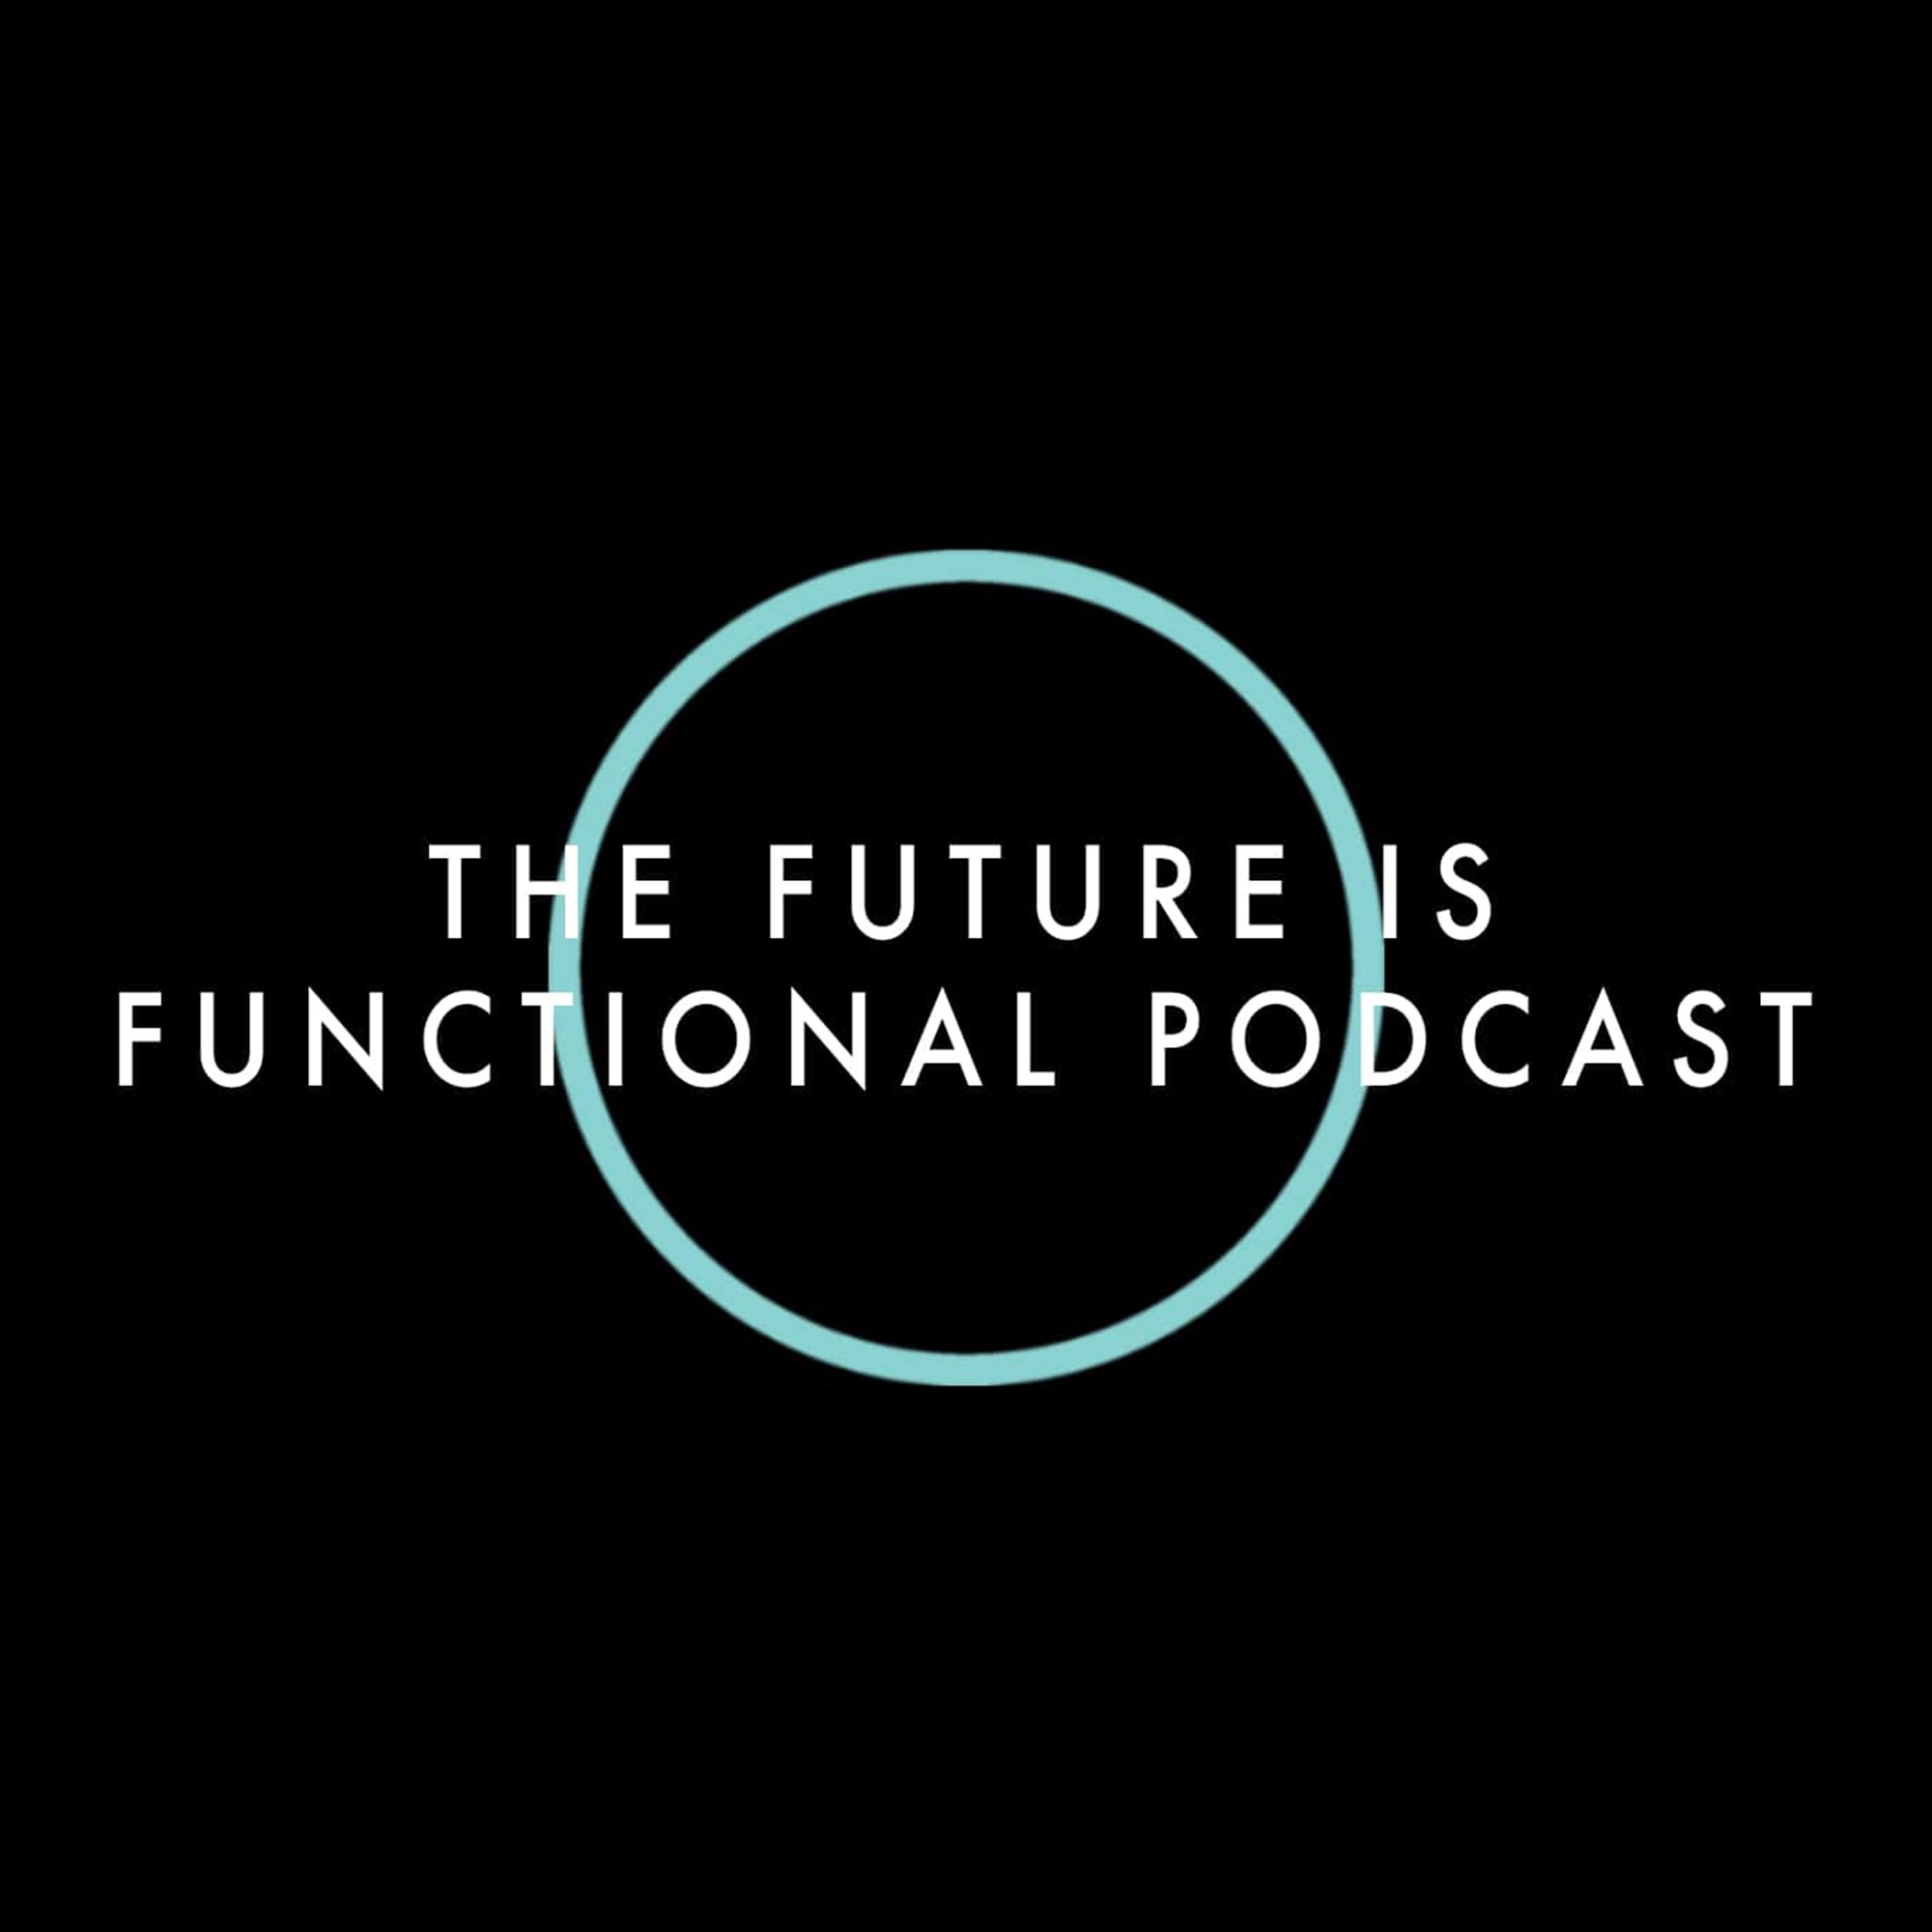 The Future Is Functional